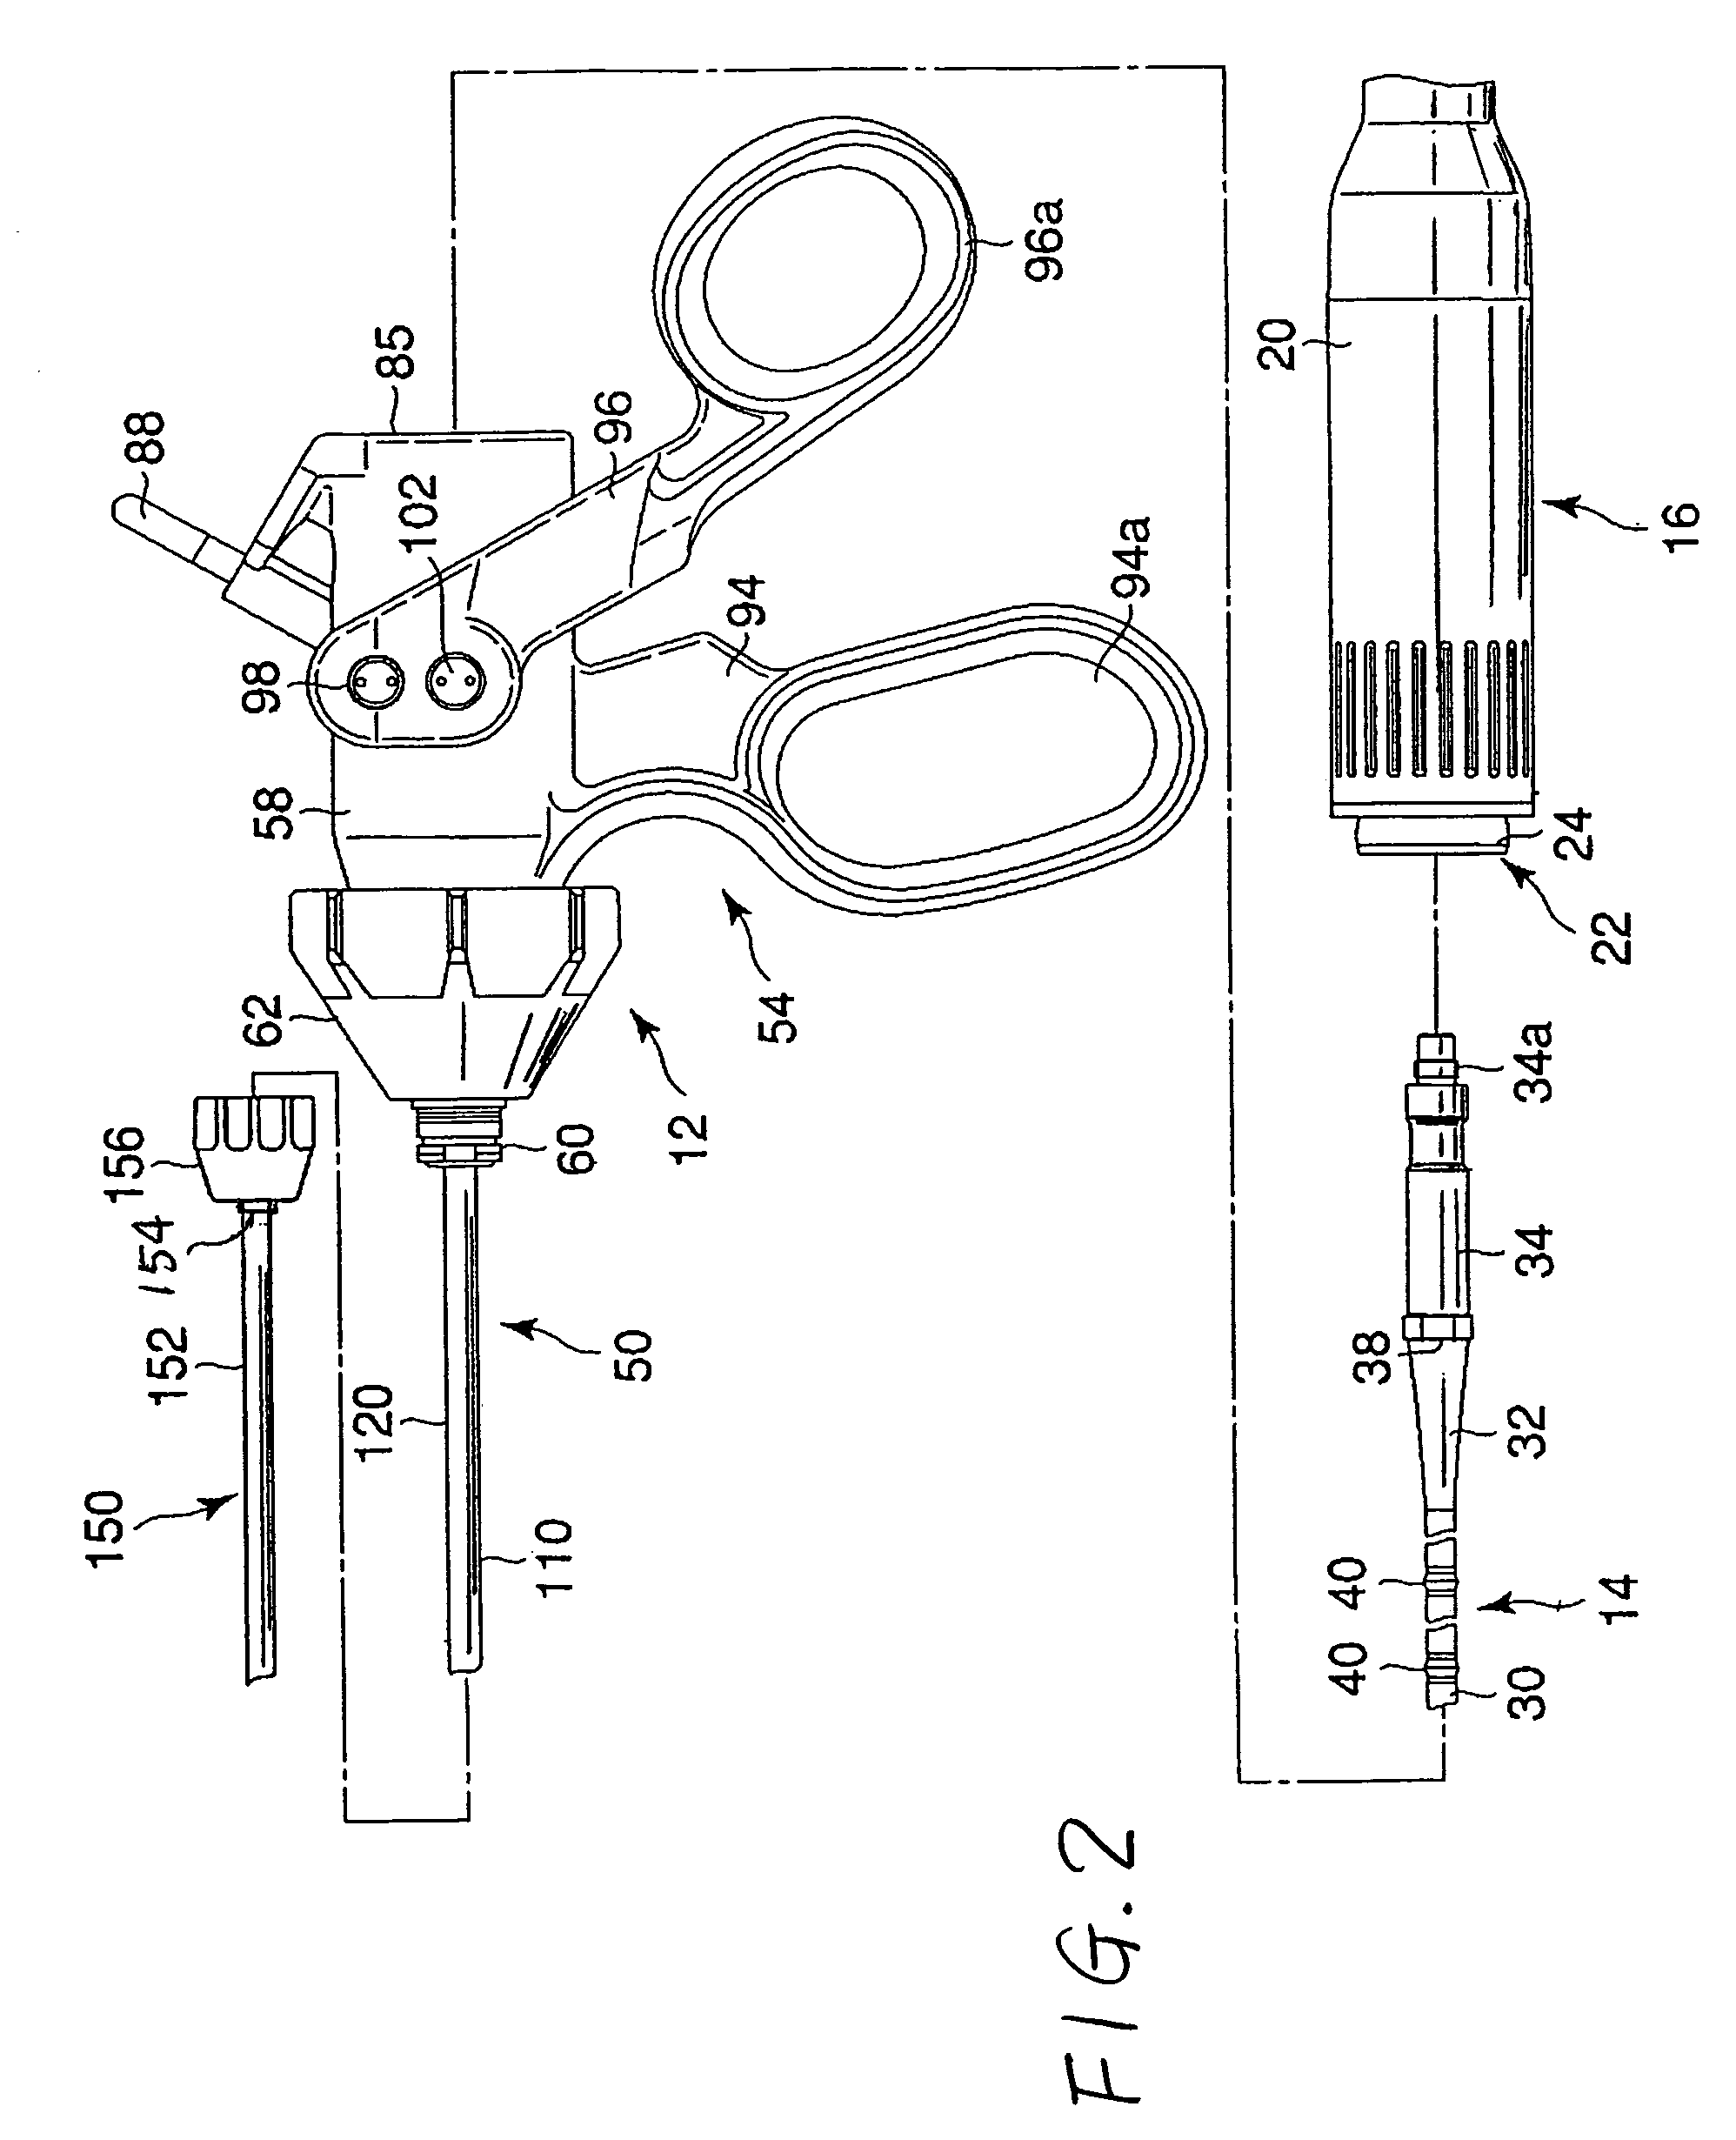 Treatment apparatus and treatment device for surgical treatments using ultrasonic vibration